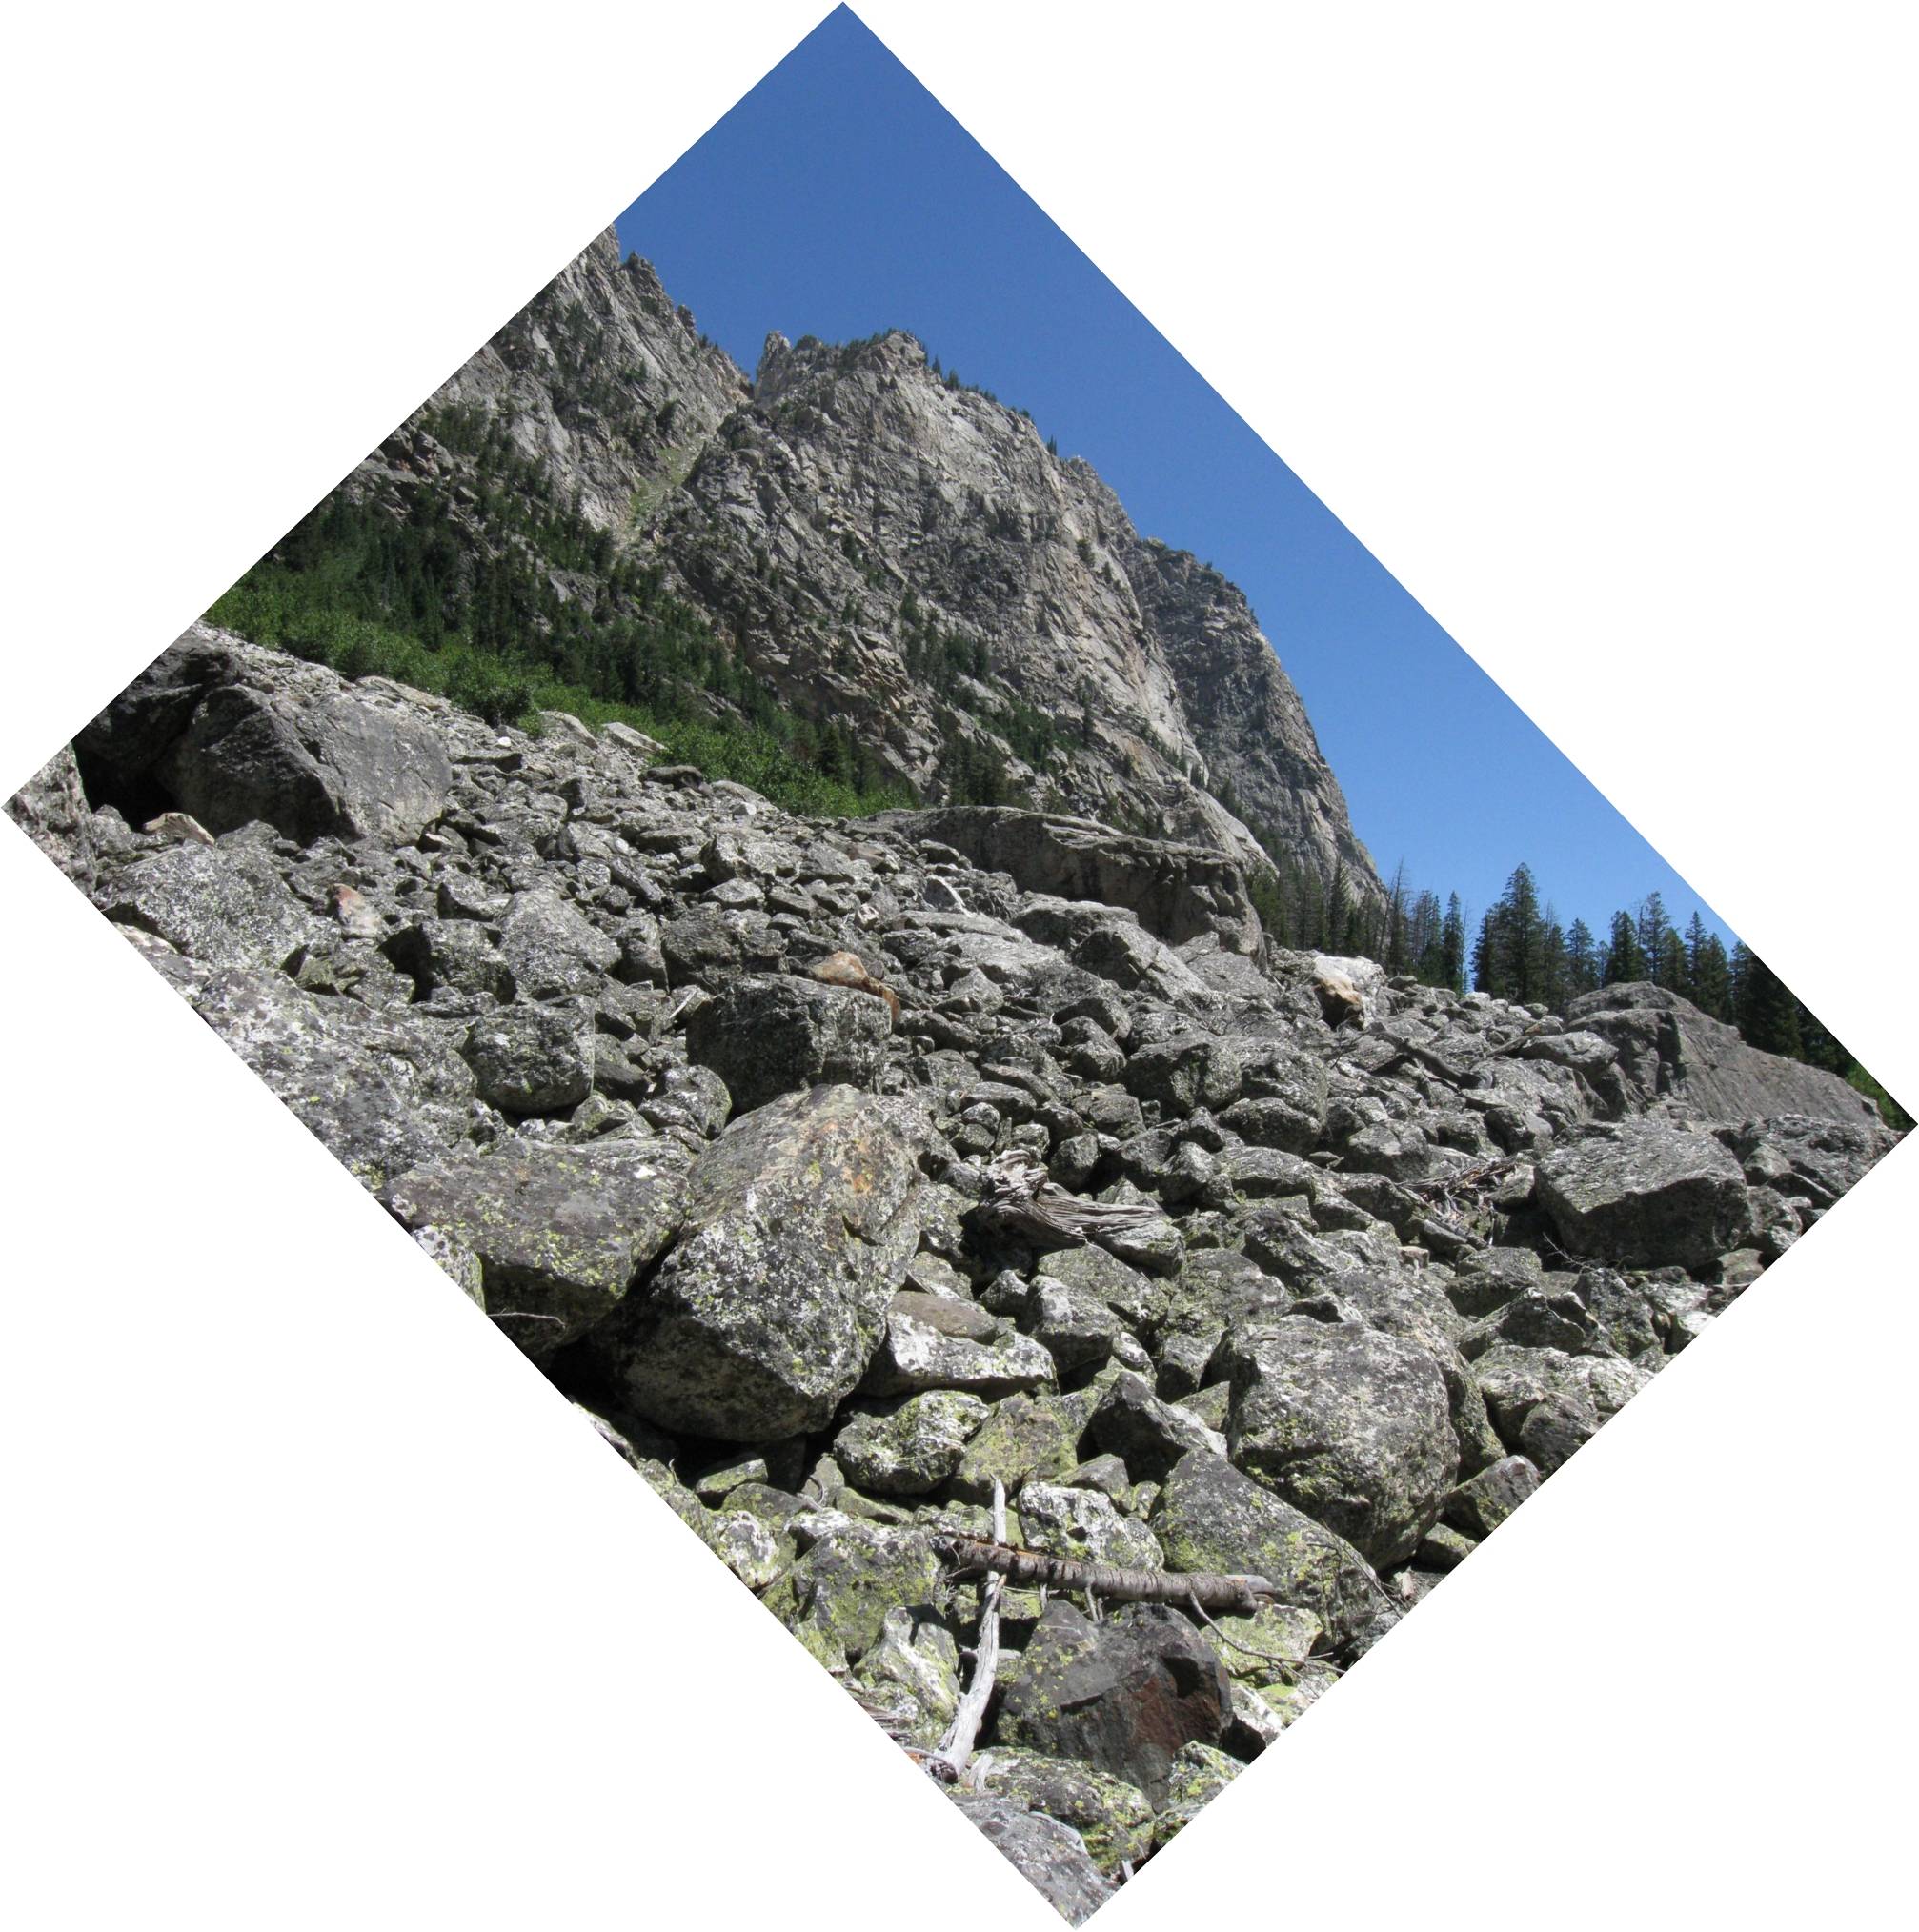 Image: The northern wall of the Cascade Canyon